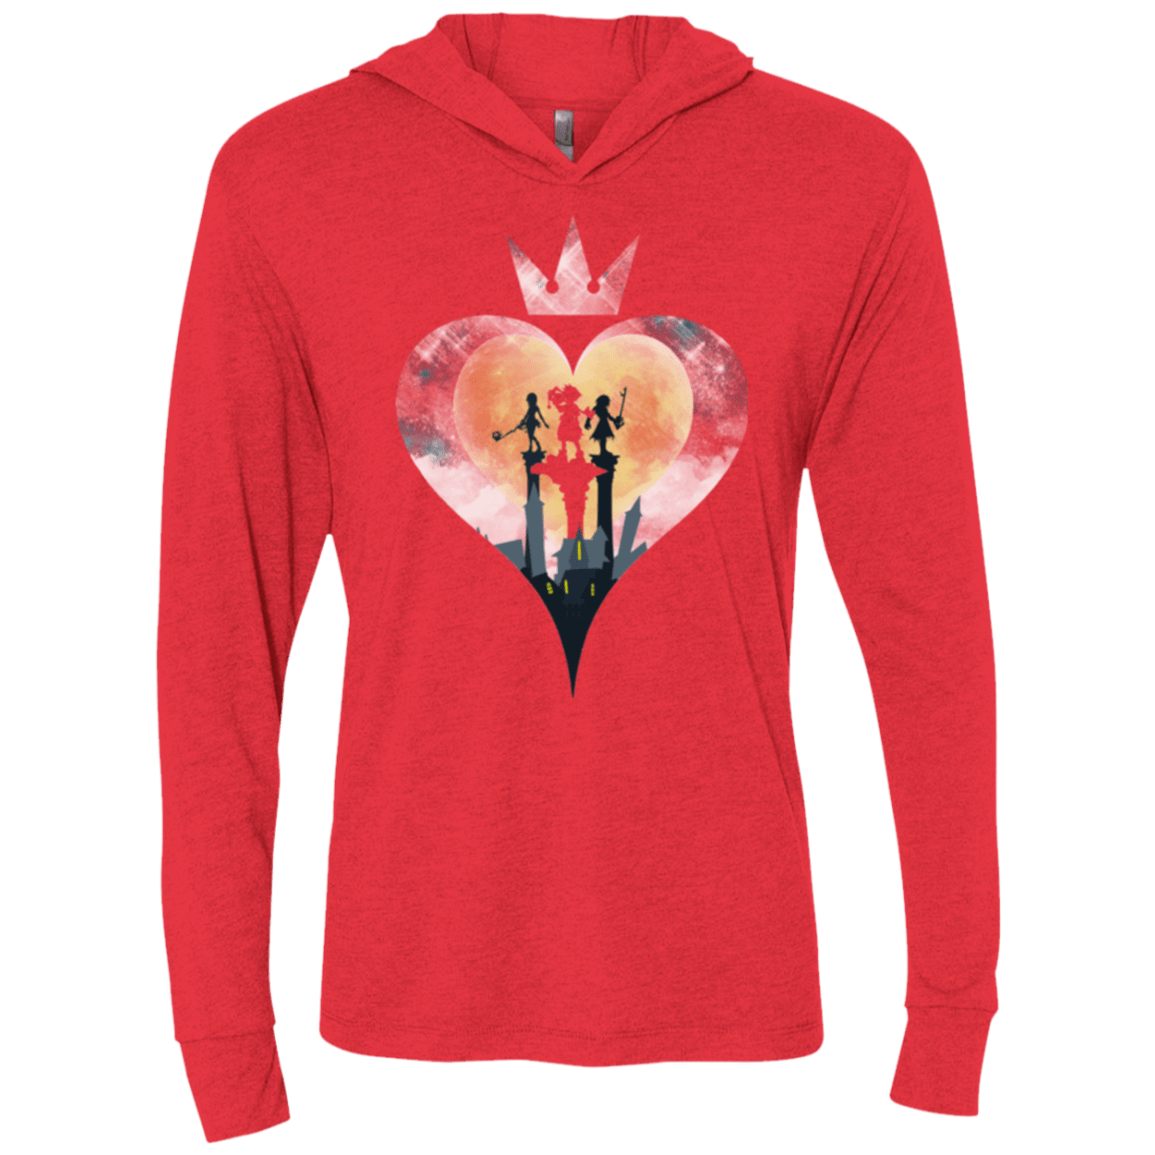 T-Shirts Vintage Red / X-Small Heart Kingdom Triblend Long Sleeve Hoodie Tee